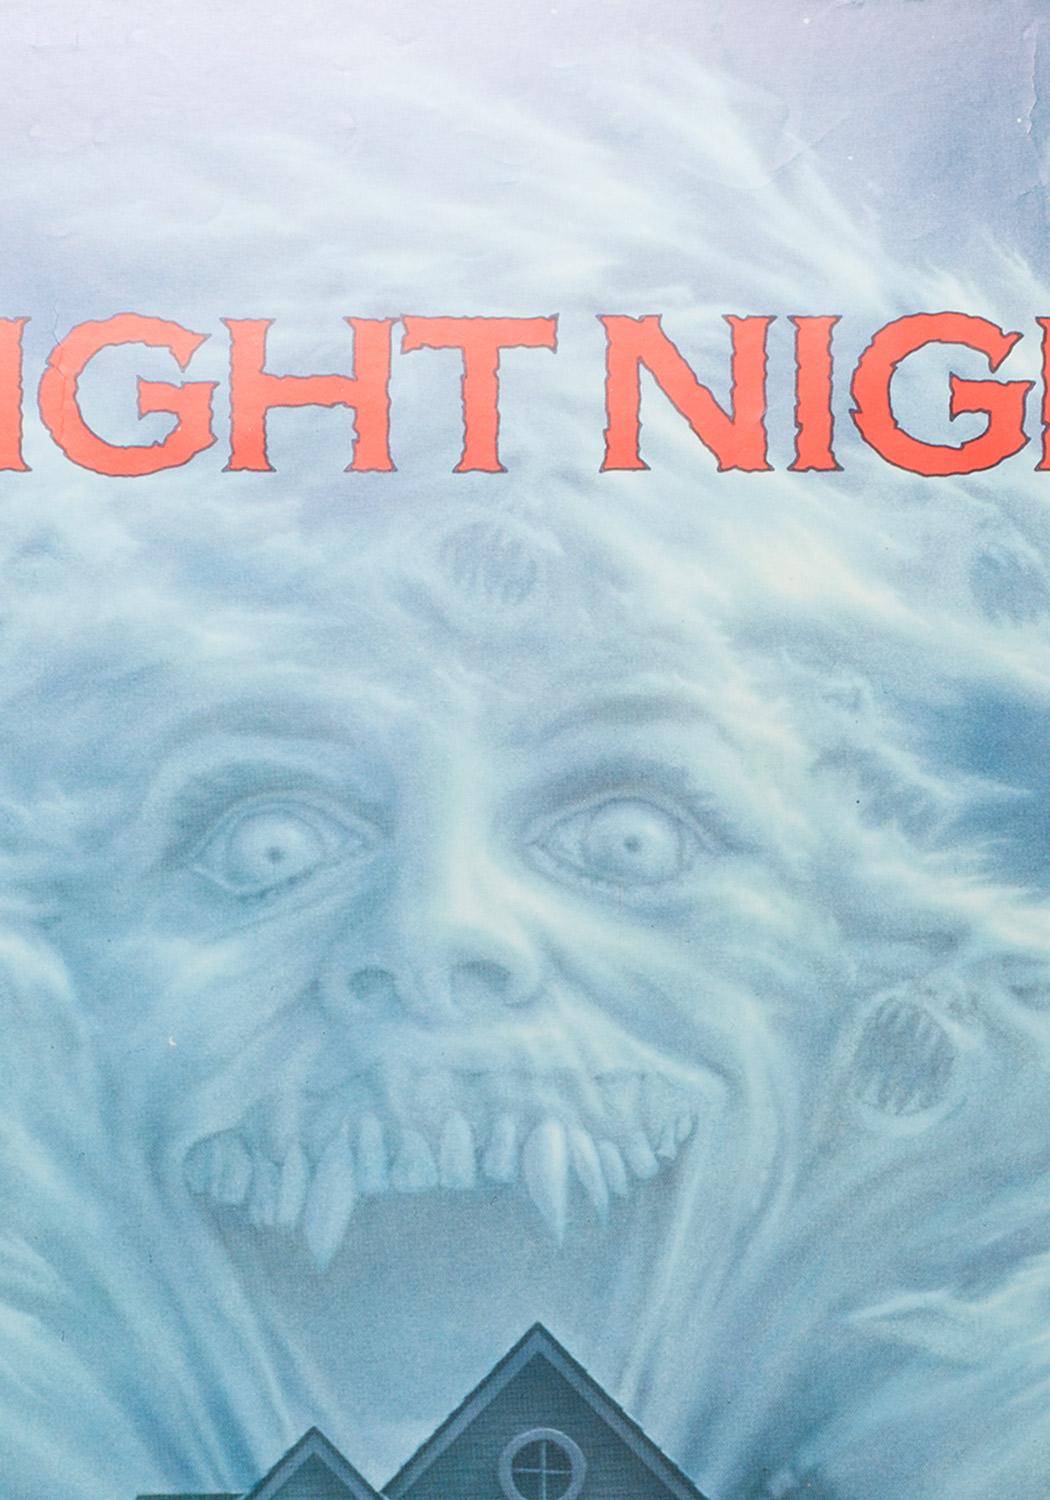 Fright Night British UK Film Poster, 1985, Peter Mueller, Rolled In Excellent Condition In Bath, Somerset